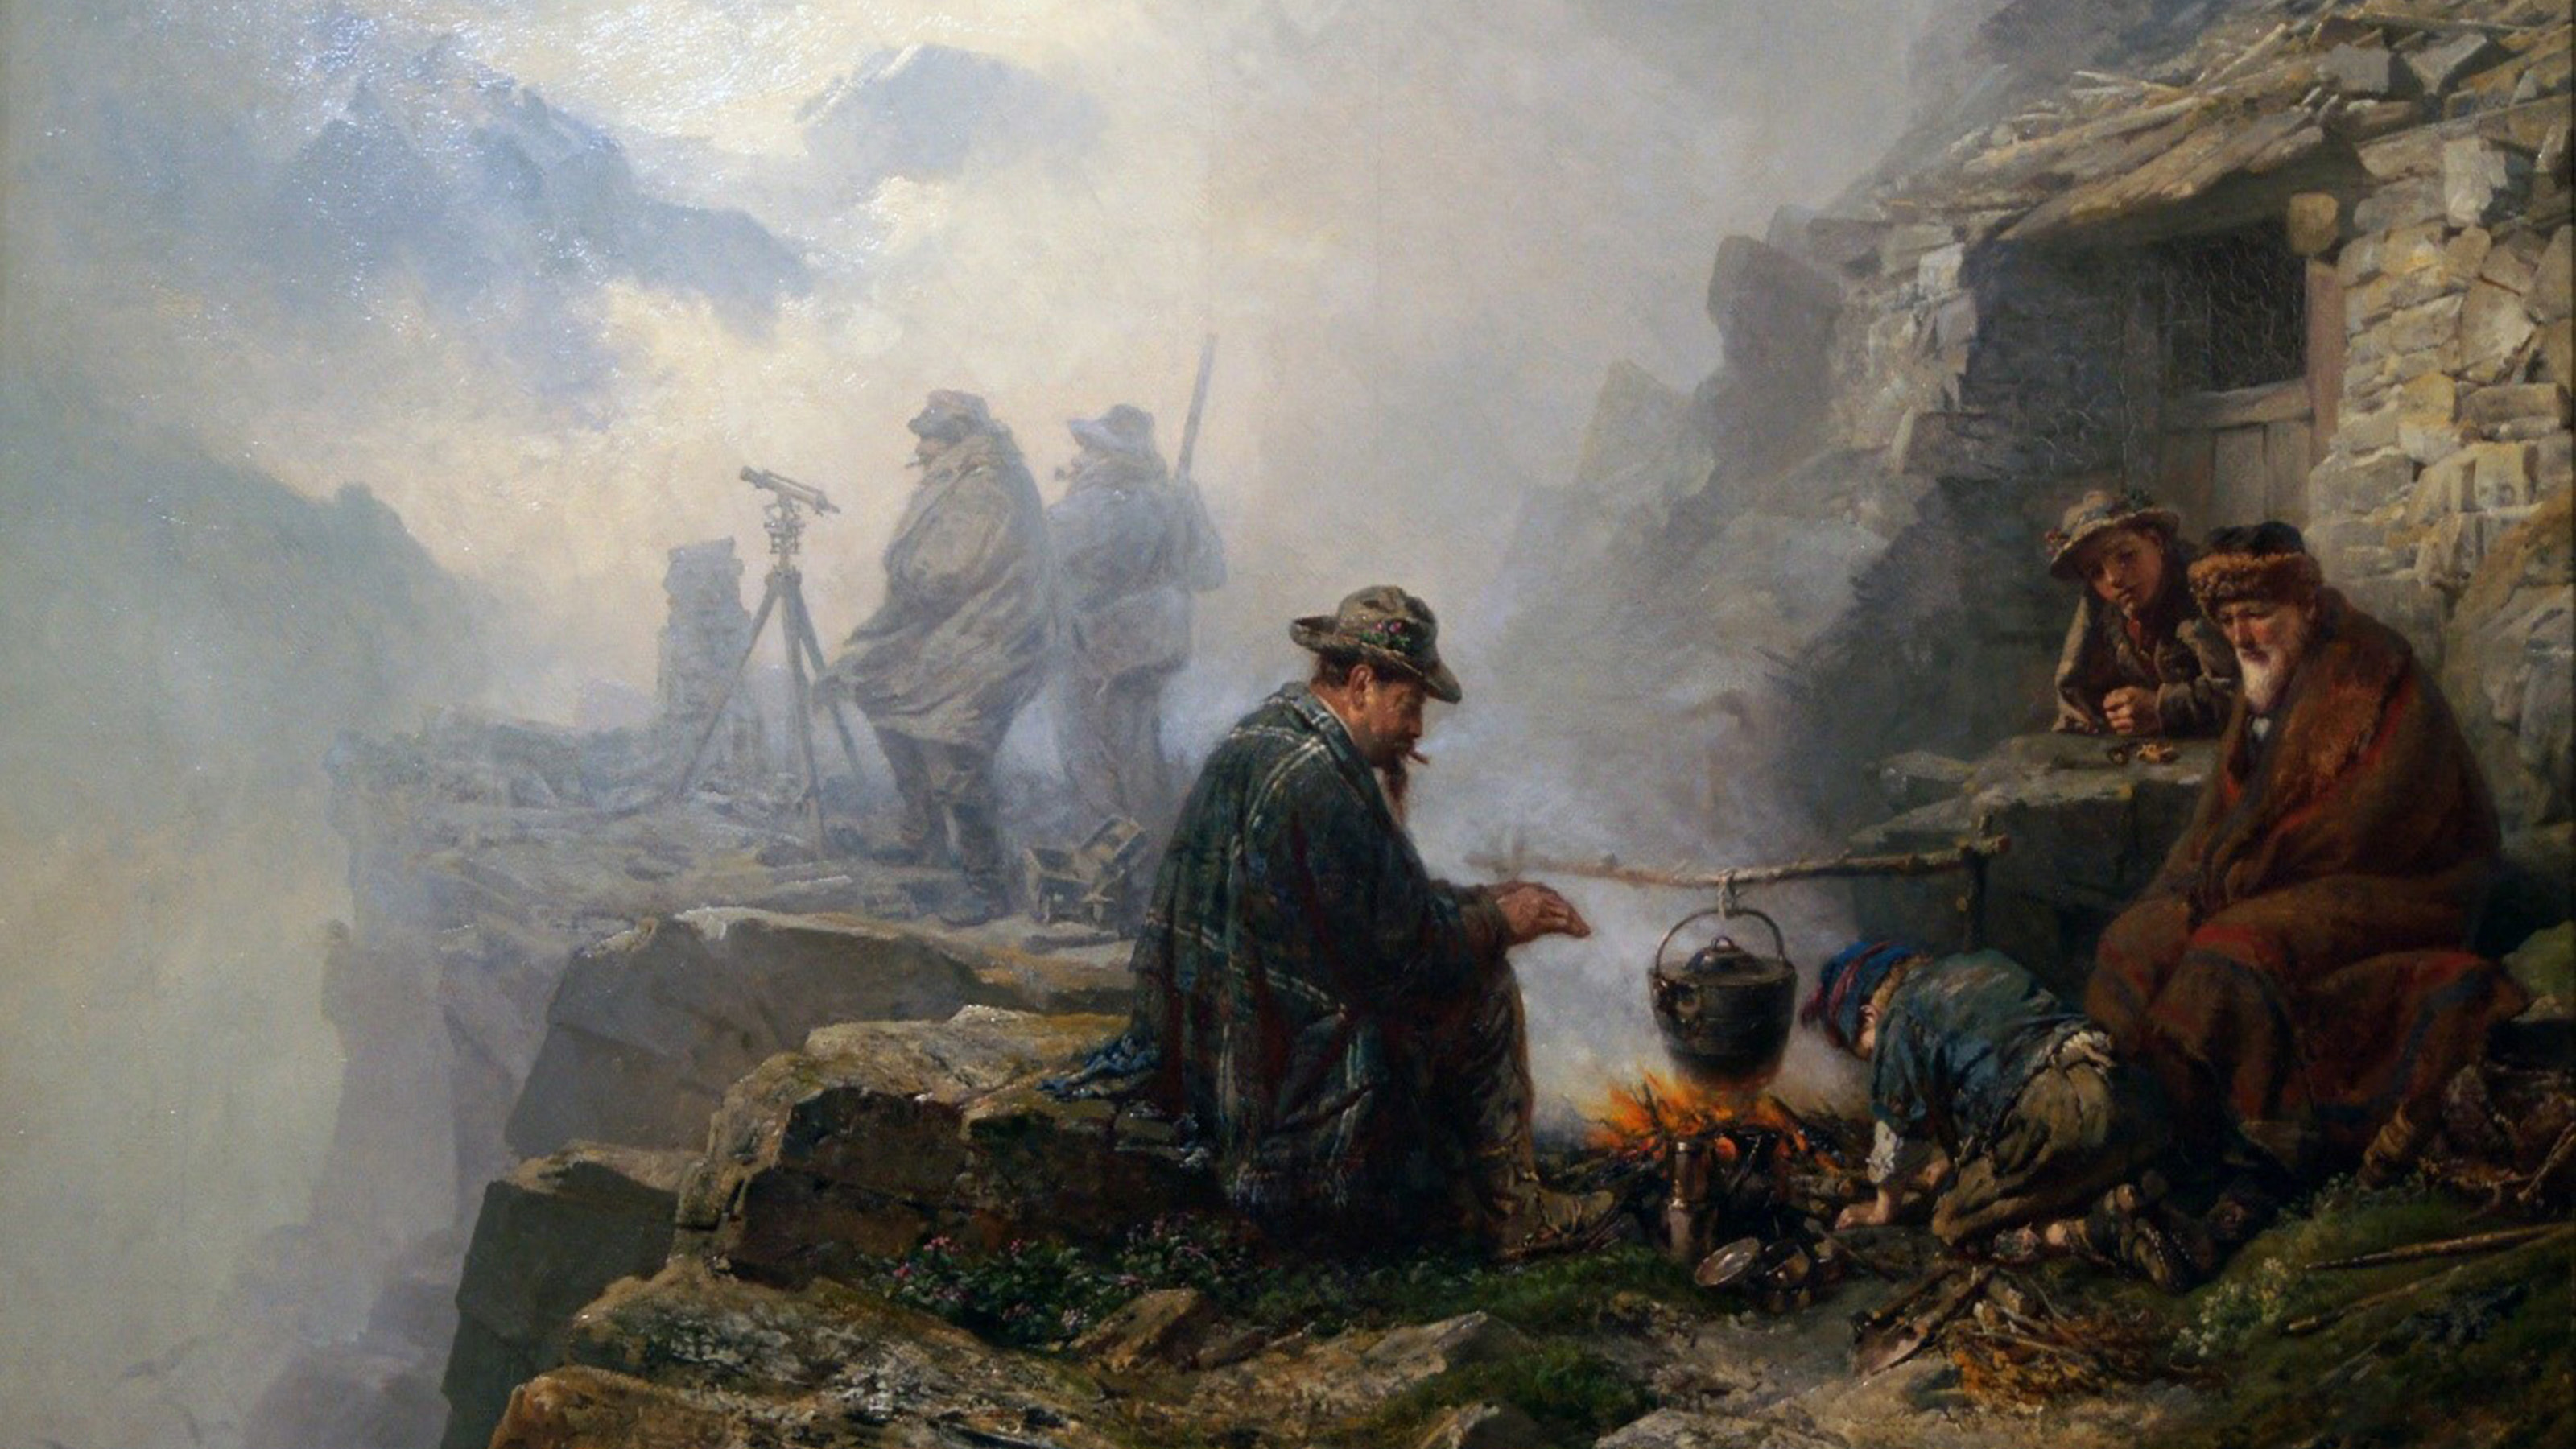 The painting shows four people gathered around a campfire in mountainous terrain. In the background, two men stand behind a theodolite in the fog.